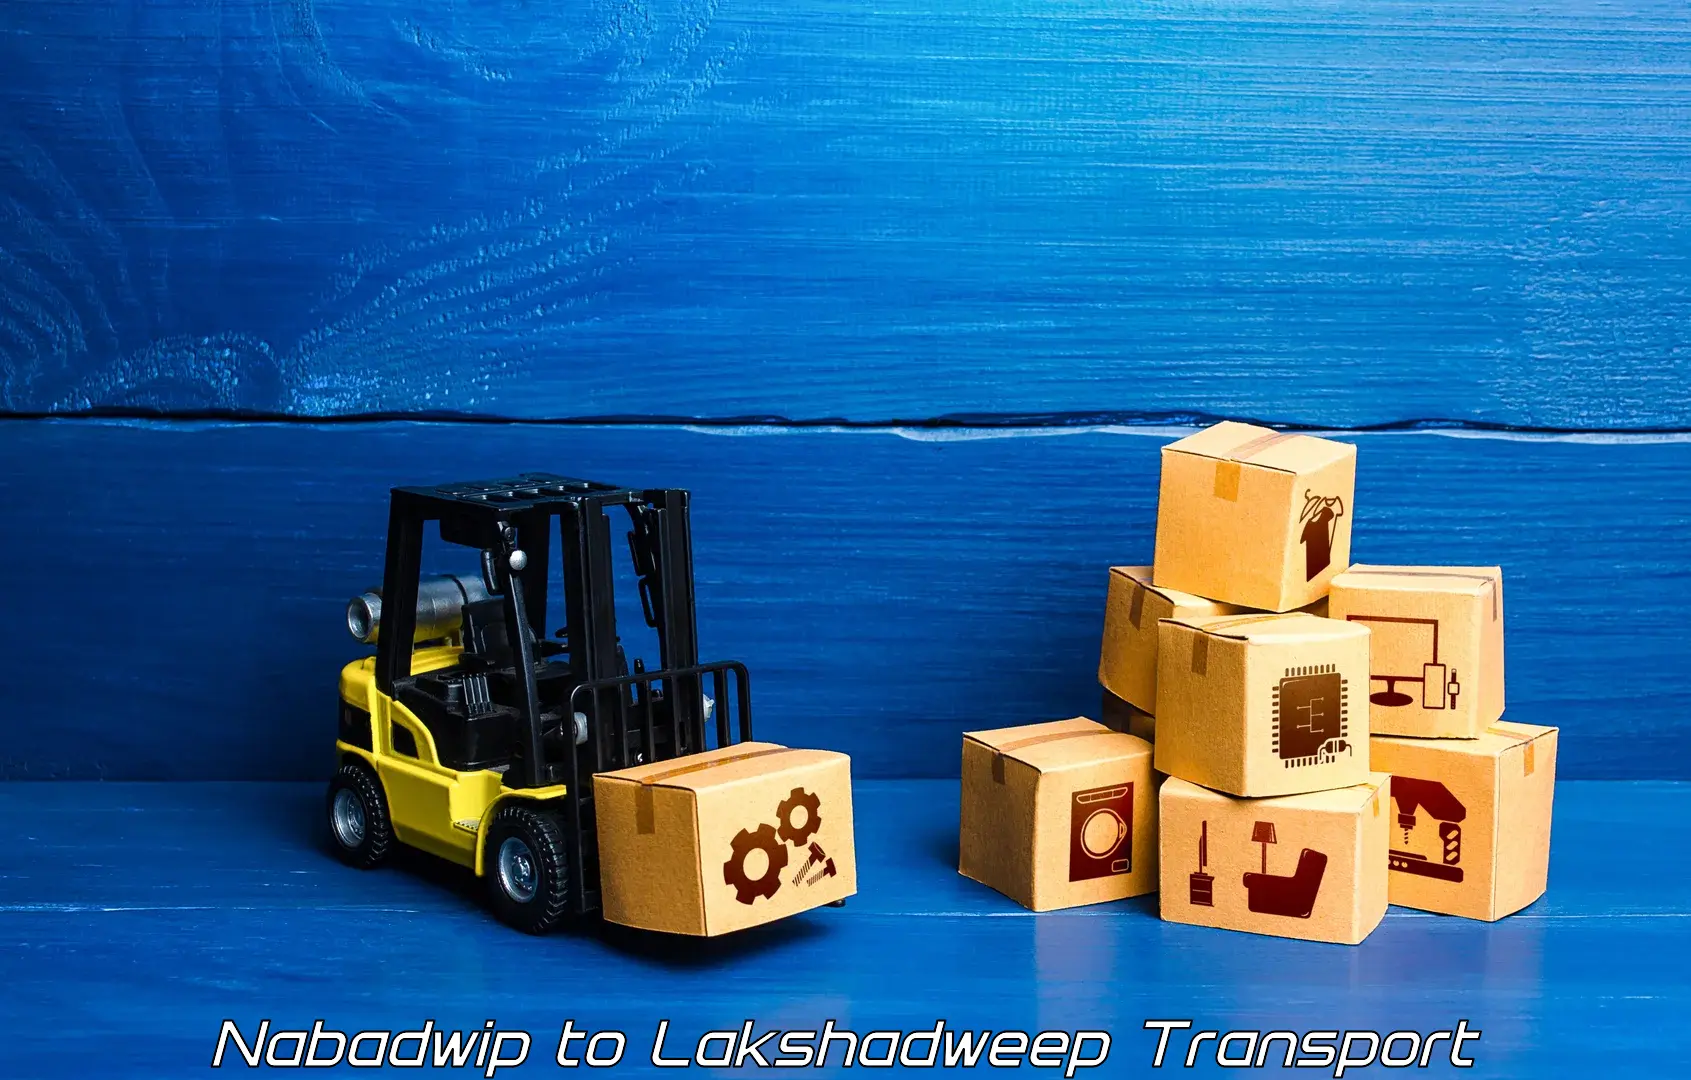 Truck transport companies in India Nabadwip to Lakshadweep